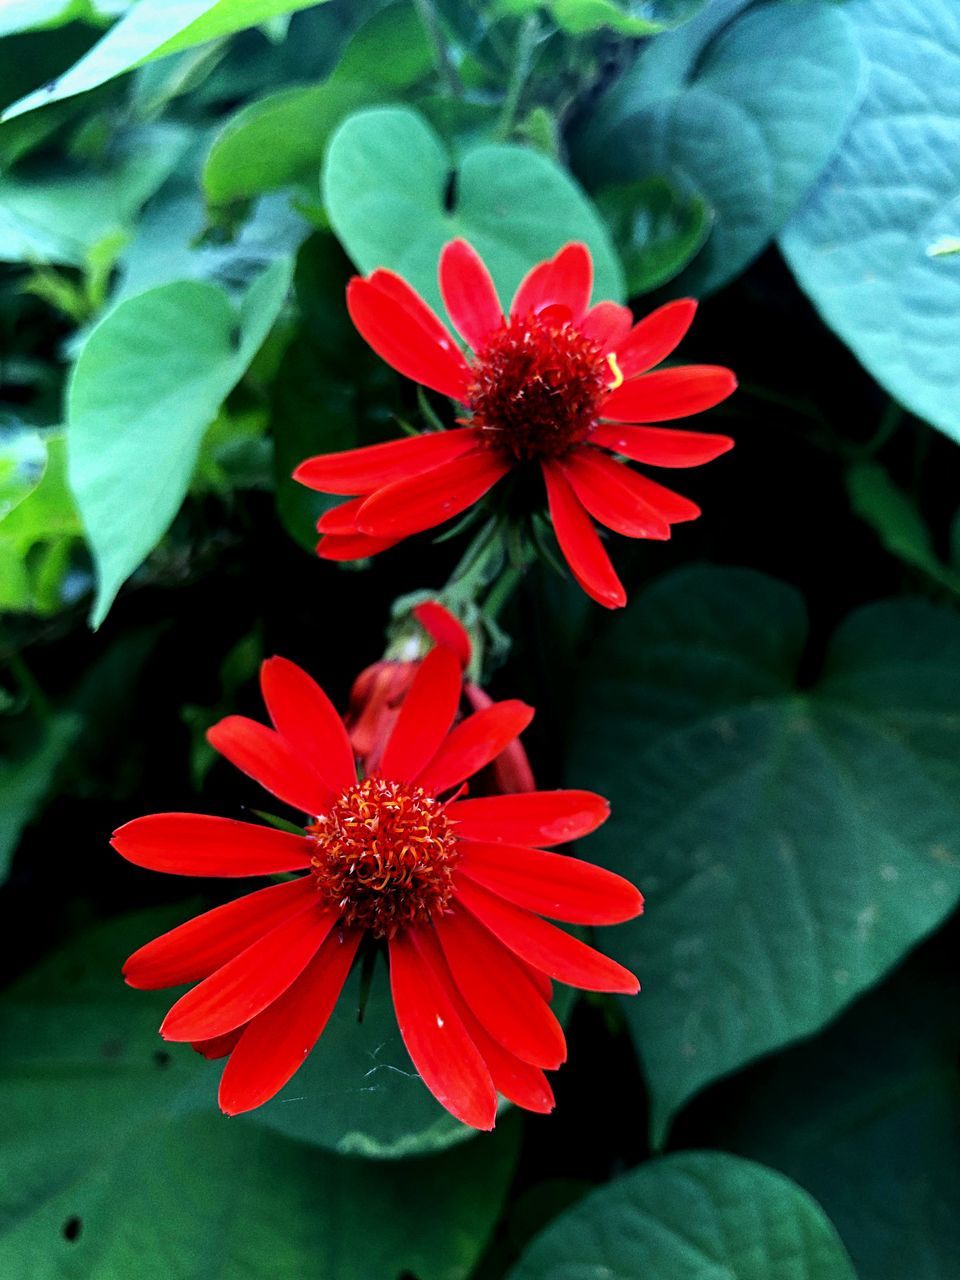 CLOSE-UP OF RED FLOWER WITH GREEN LEAVES